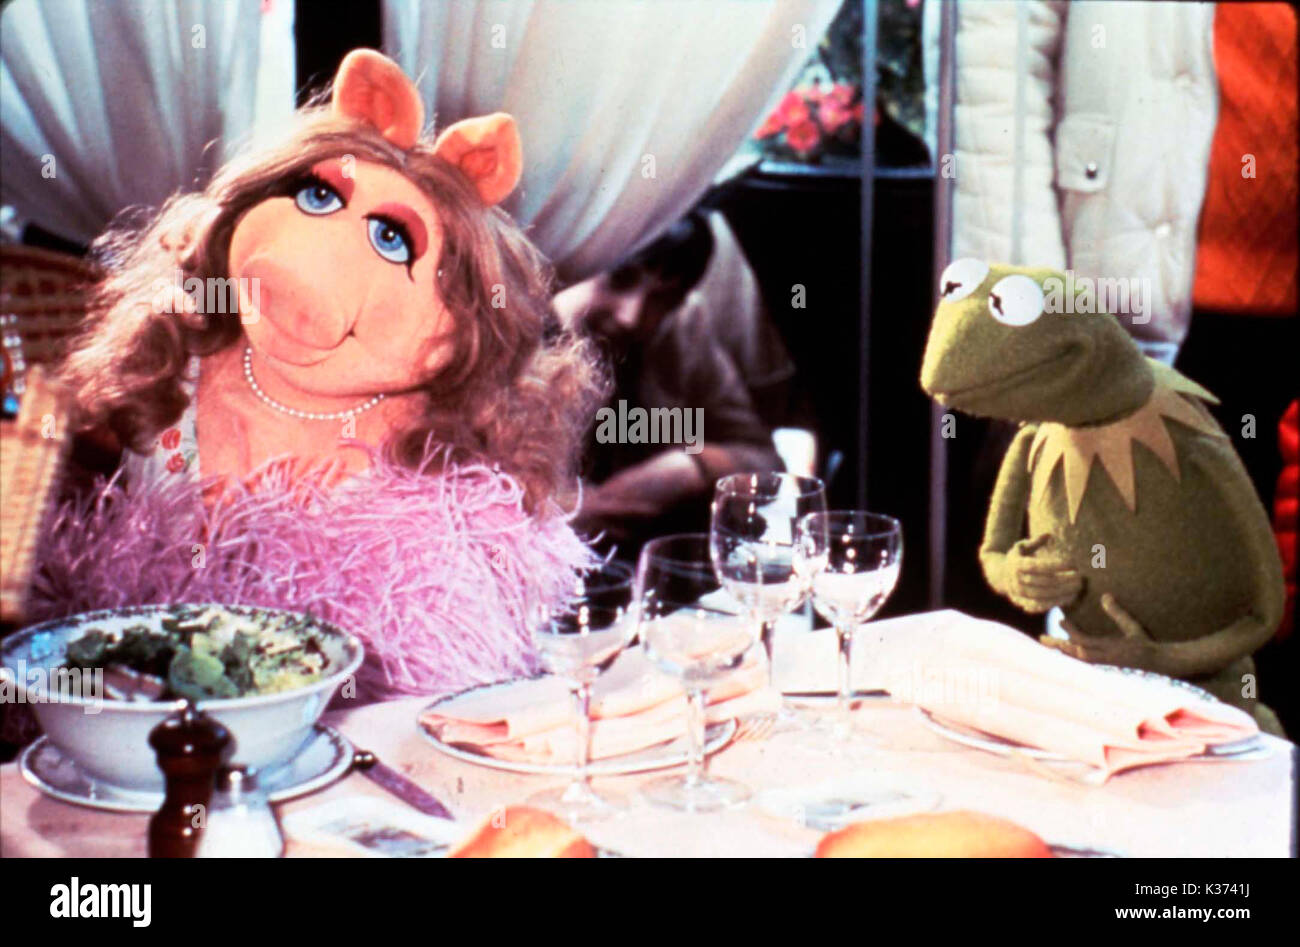 MUPPET SHOW MISS PIGGY, KERMIT THE FROG Stock Photo